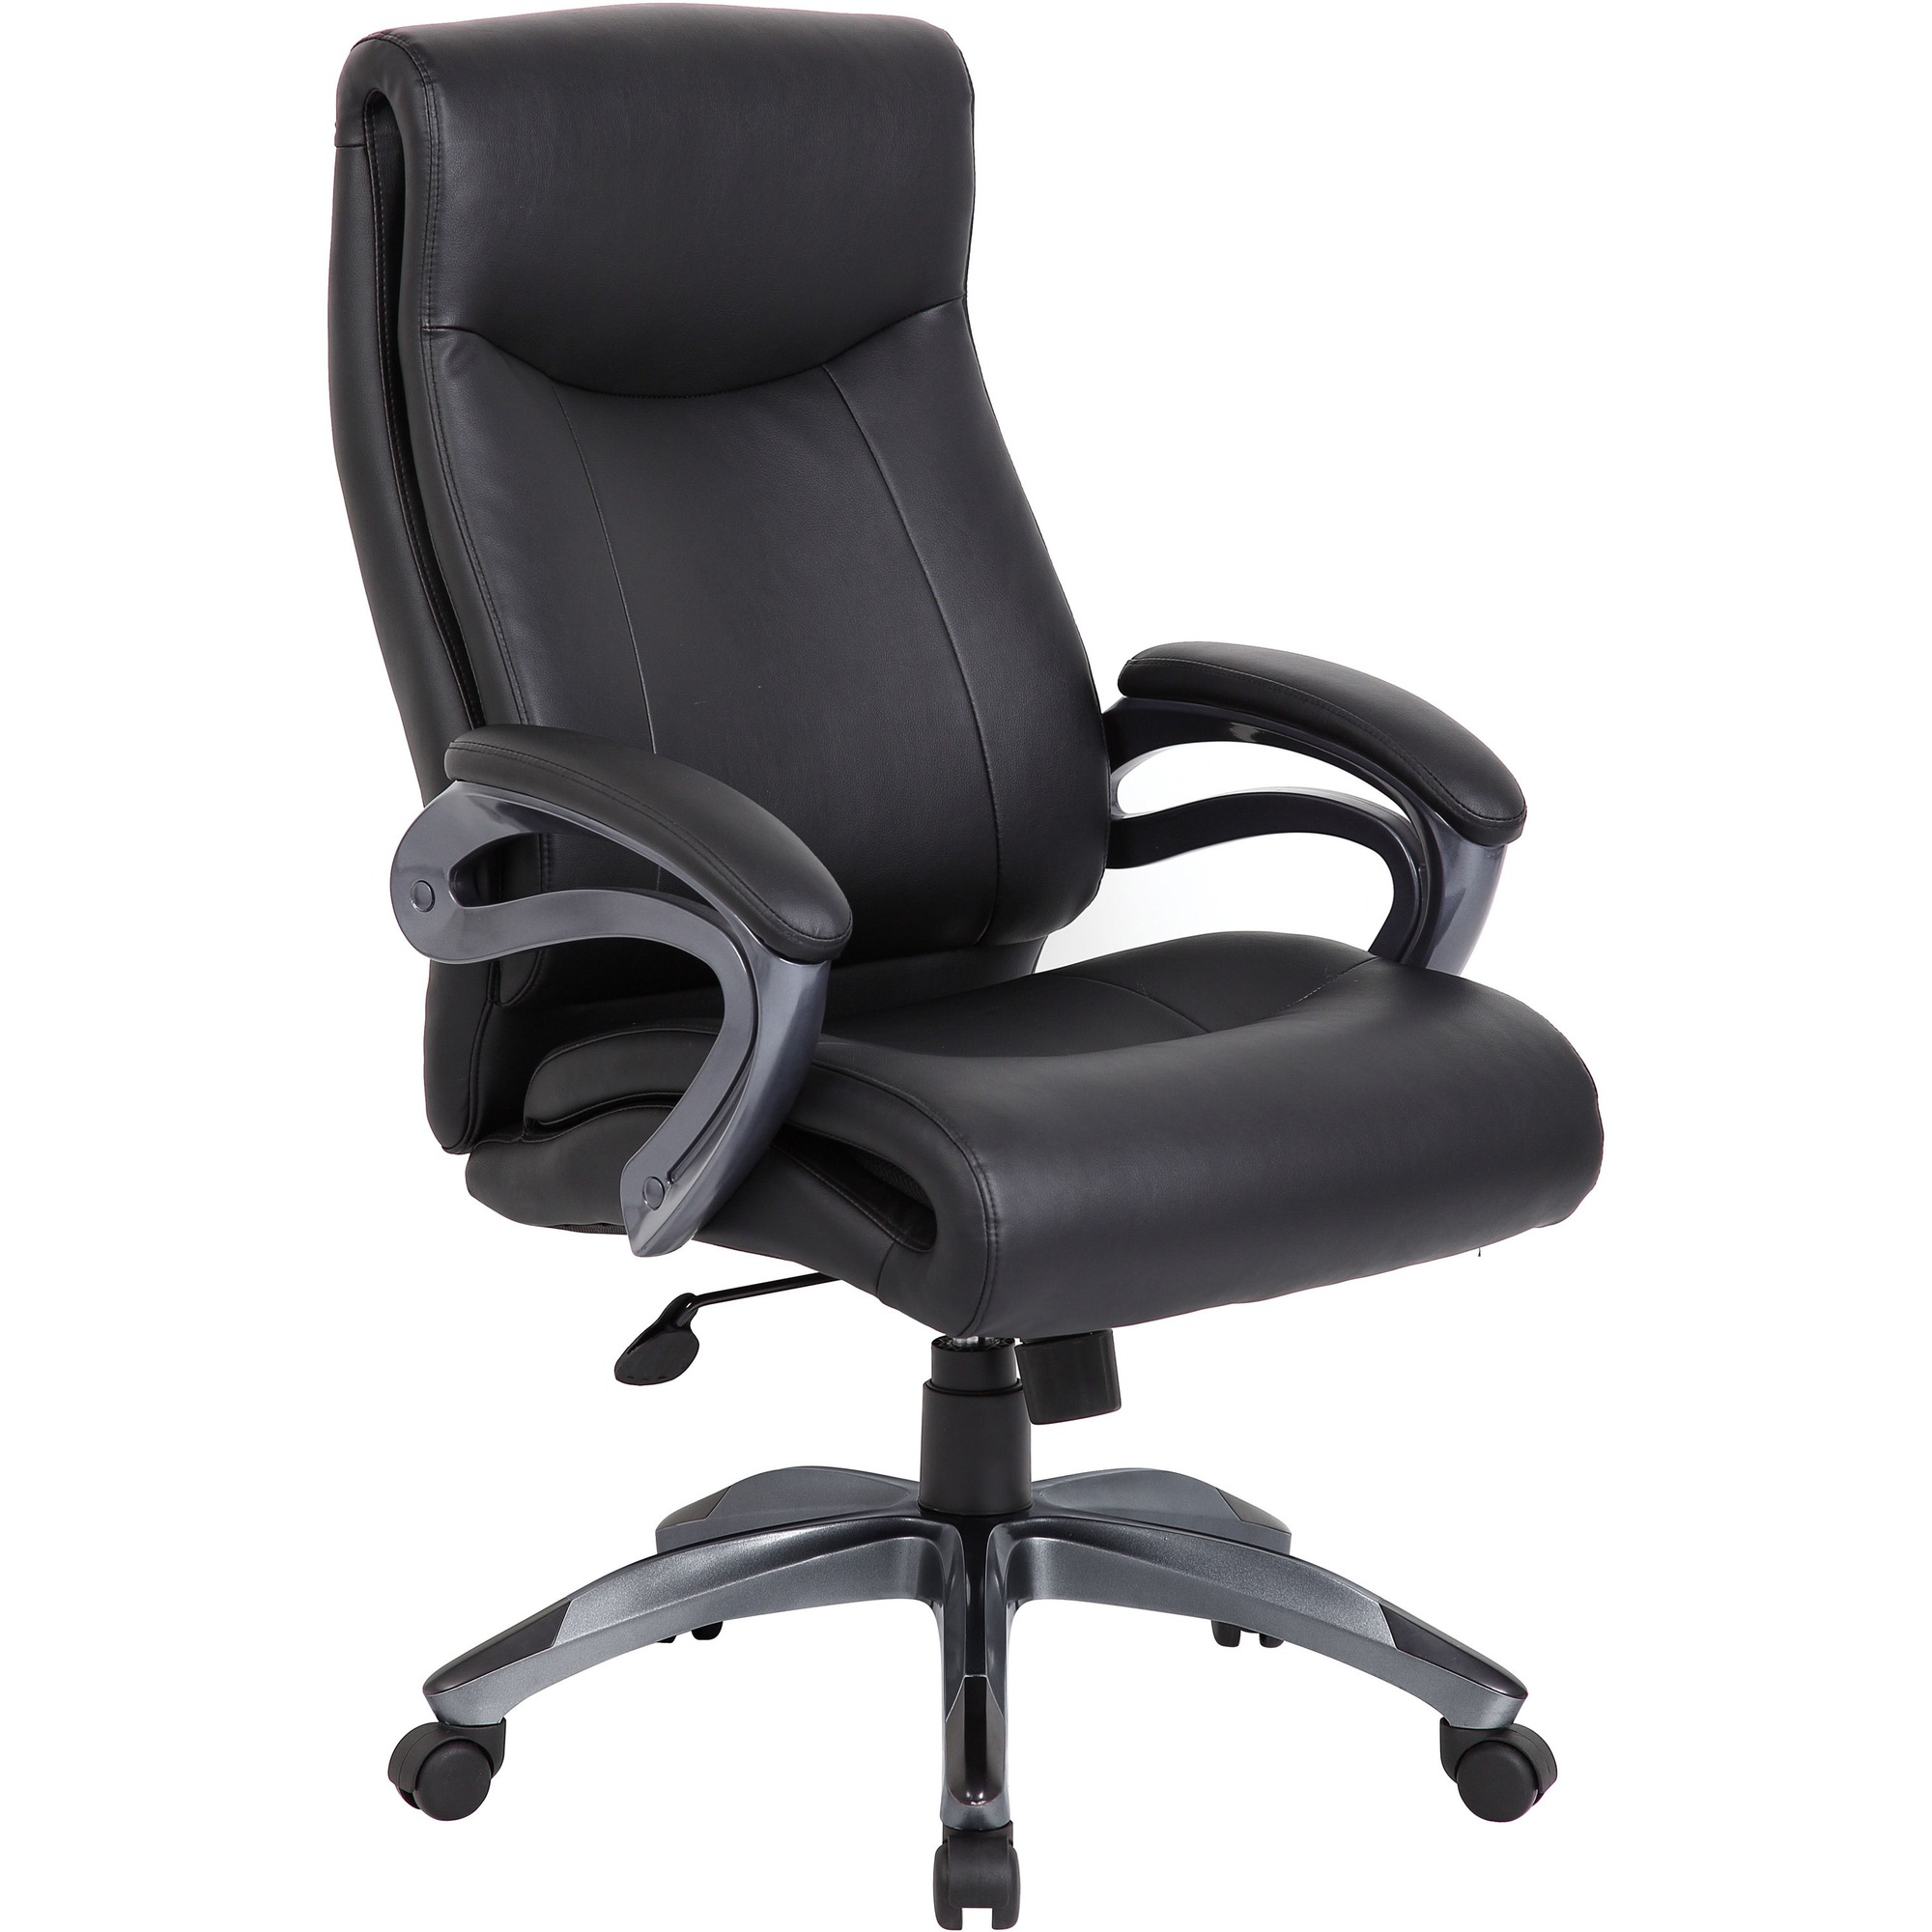 Lorell High Back Executive Chair - Leather Black Seat - 5-star Base - 27 Width X 30 Depth X 46.5 Height